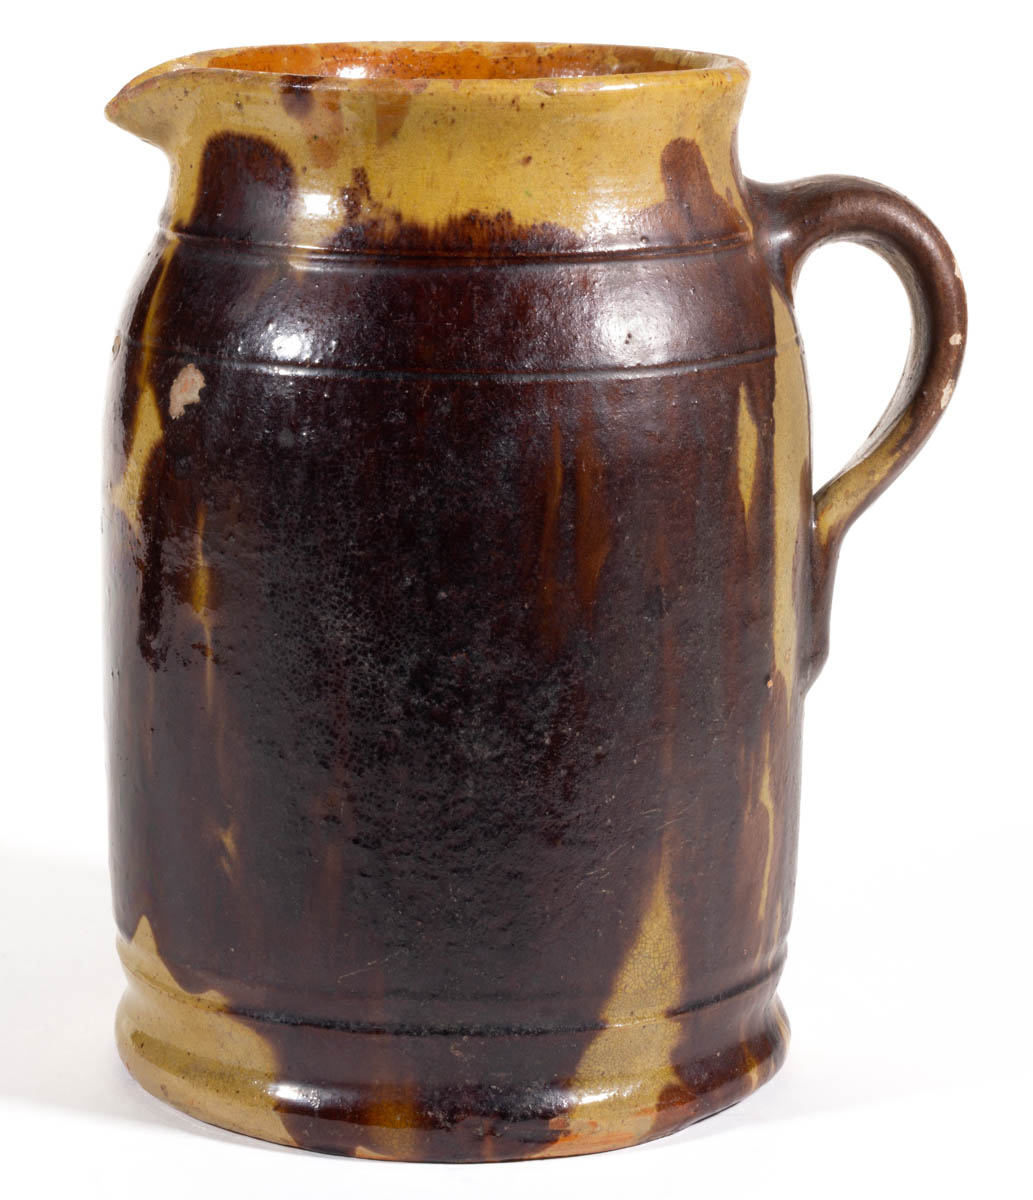 STAMPED “S. BELL & SON / STRASBURG”, SHENANDOAH VALLEY OF VIRGINIA DECORATED EARTHENWARE / REDWARE PITCHER